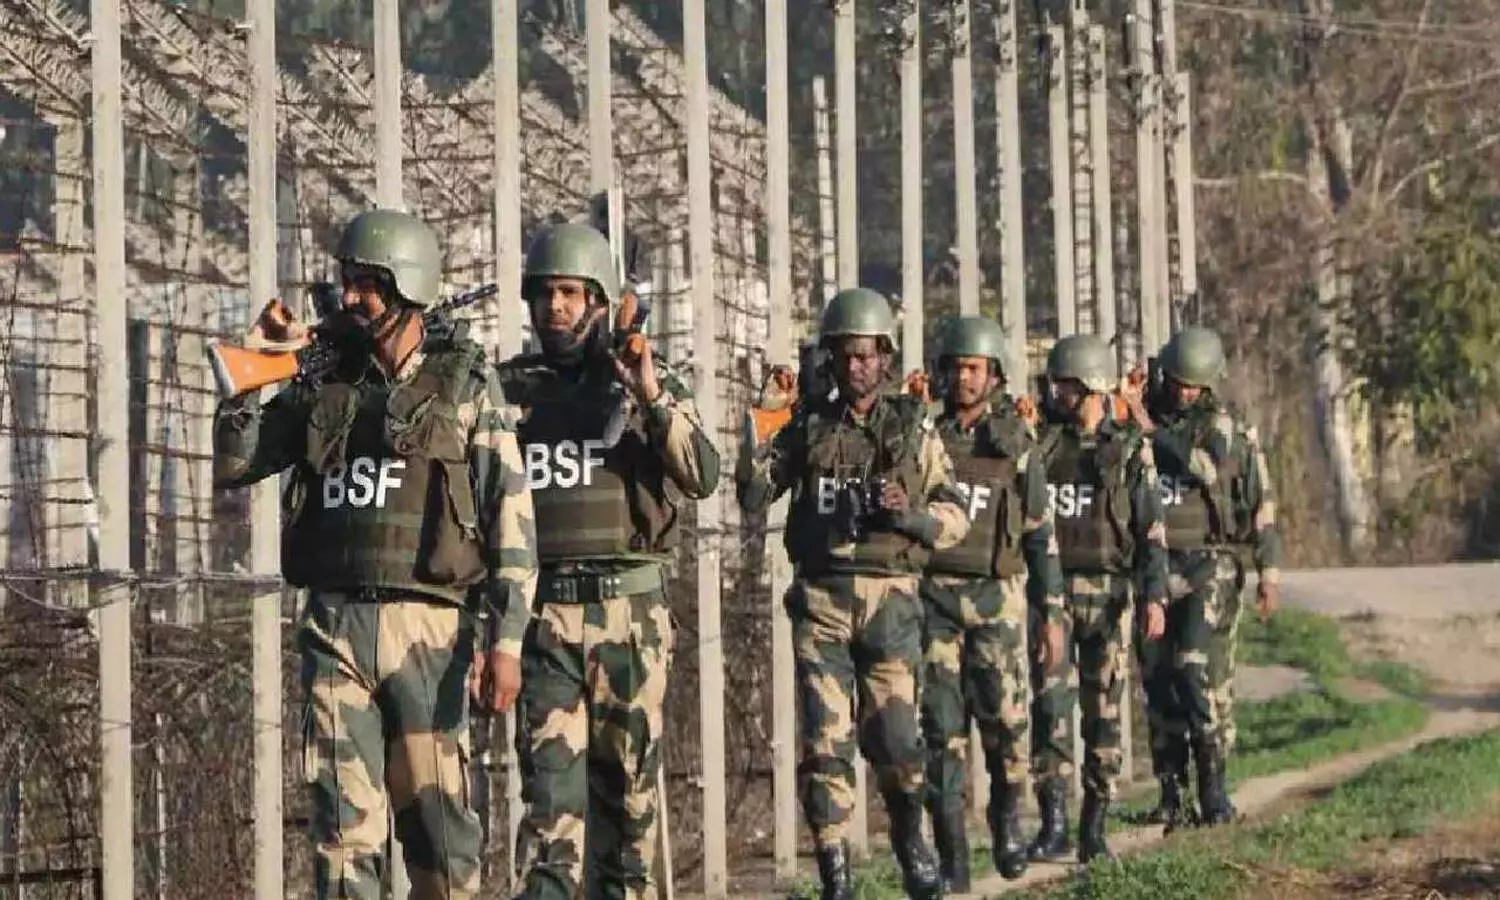 BSF Recruitment: Border Security Force announces over 2,700 vacancies at rectt.bsf.gov.in, know details here